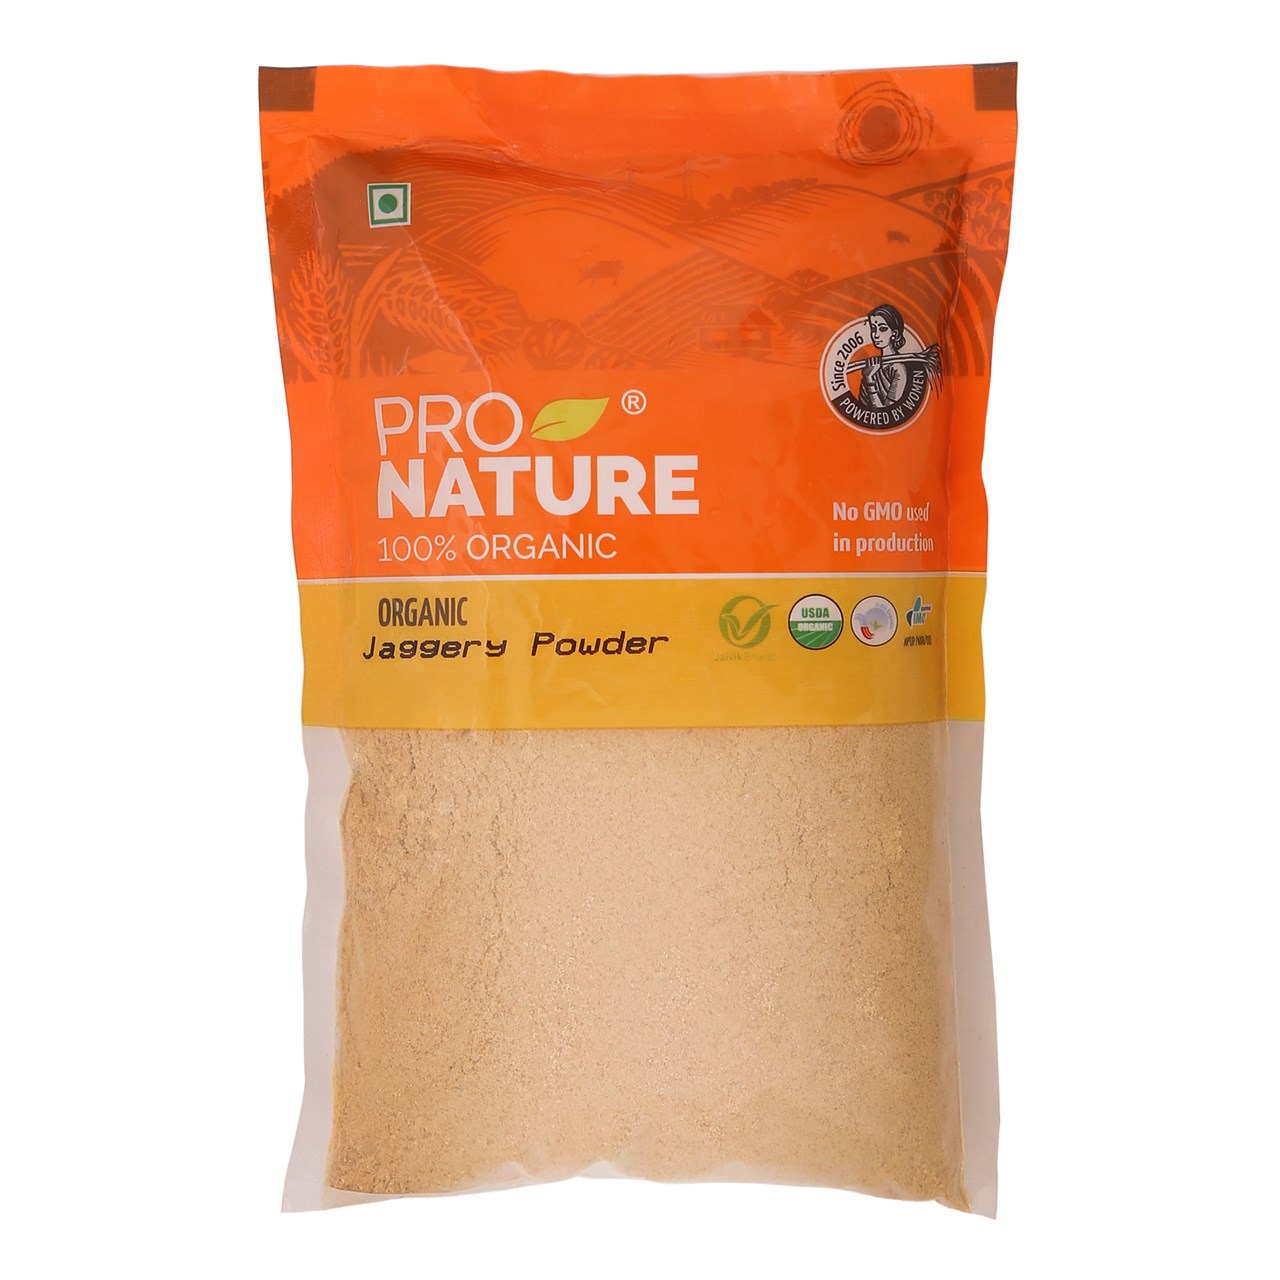 Picture of Jaggery Powder 400g